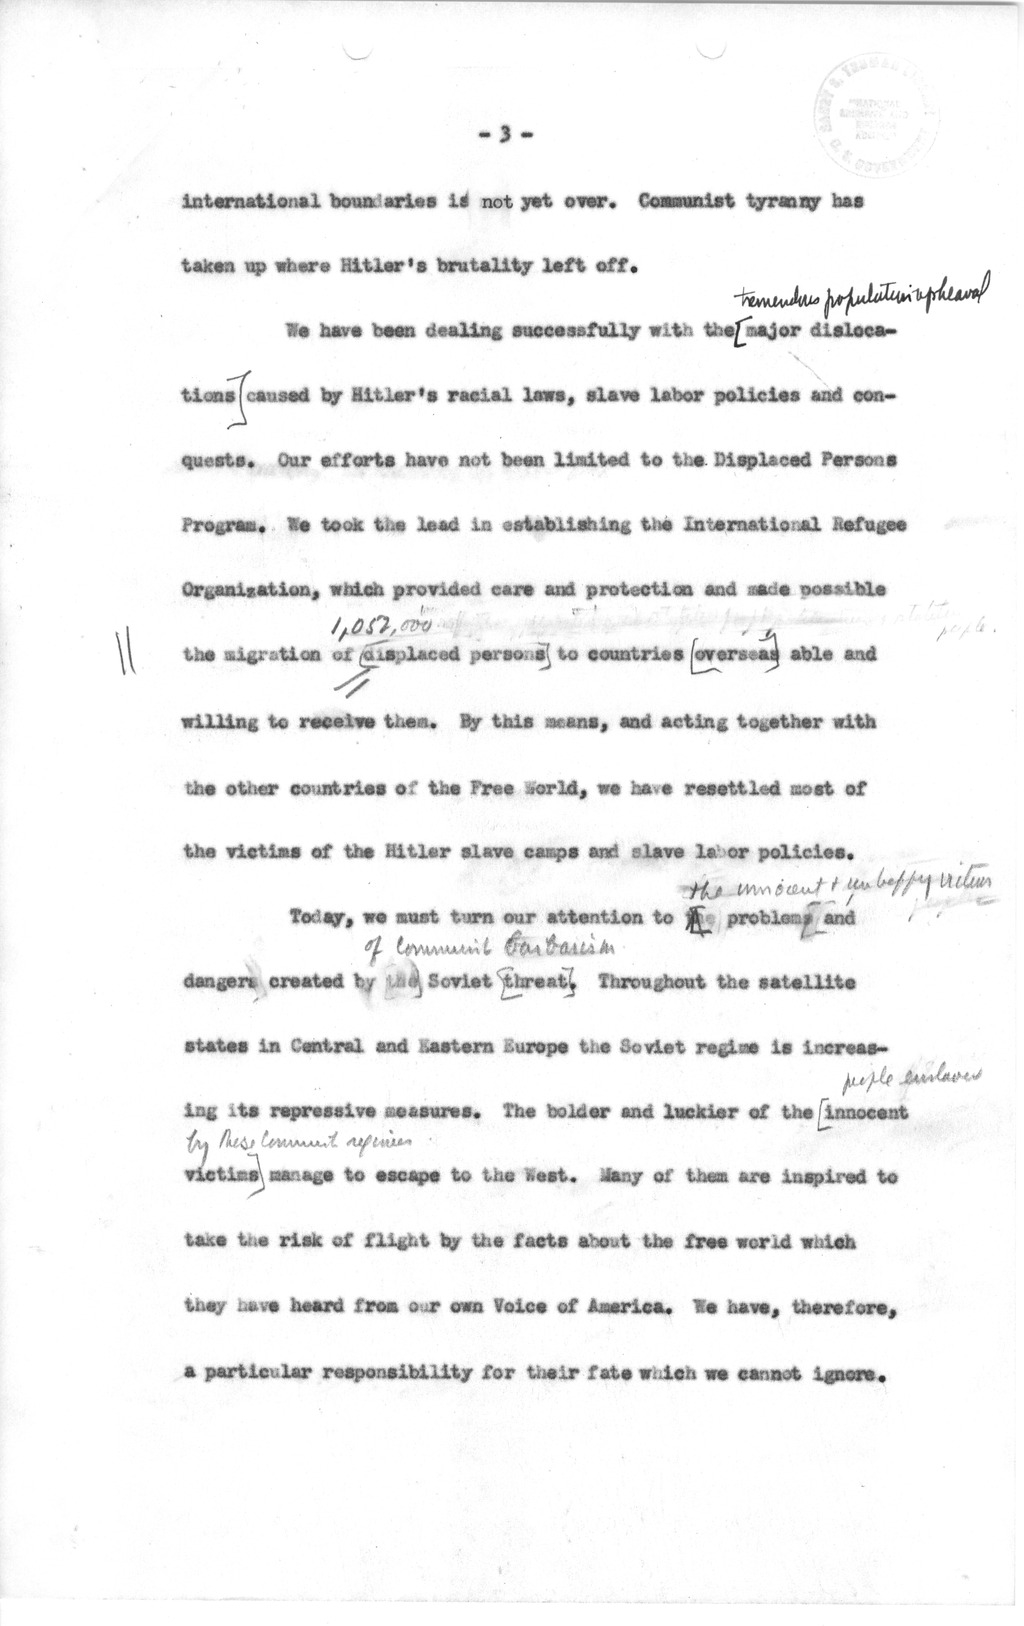 Memorandum from David Lloyd to Samuel Berger, with Attached Message Draft